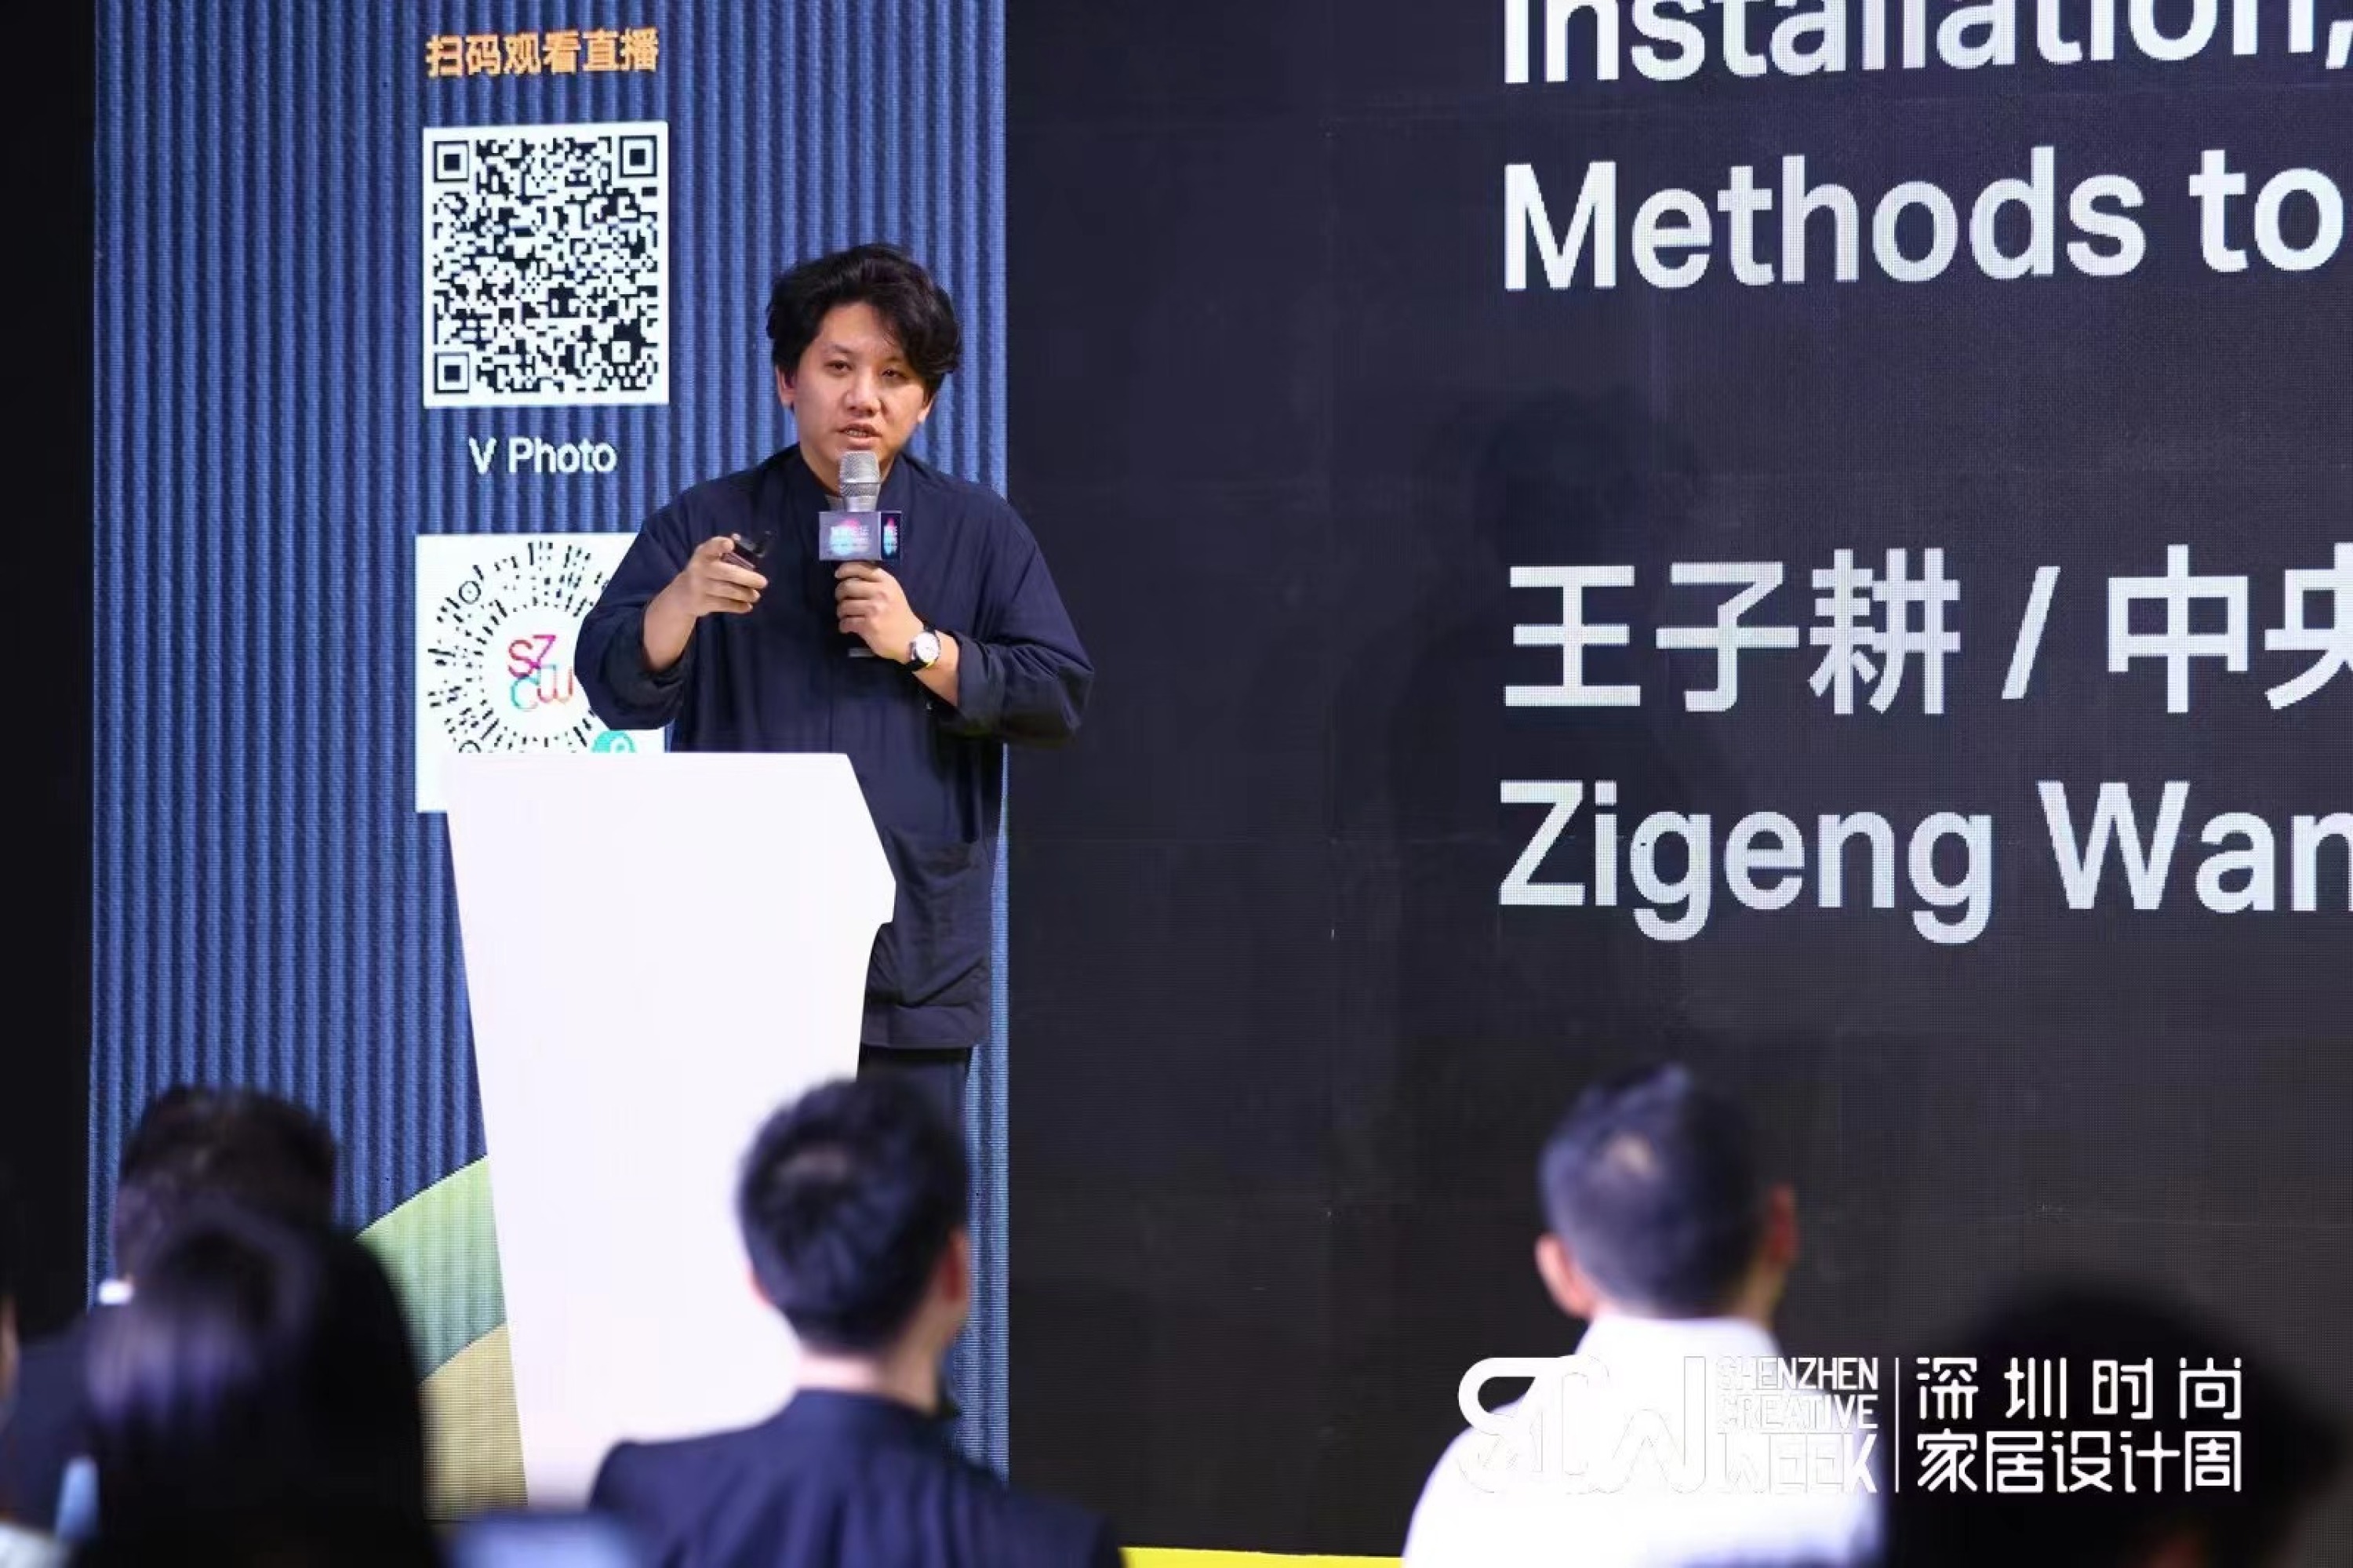 Zigeng Wang Participated in the 2nd Shenzhen Forum on “High-Quality Development of Public Buildings,” hosted by the Bureau of Shenzhen Public Works. He Gave a Speech on “Installation, Space, and Biennale: Several Methods to be Involved in Urban Publicness.”